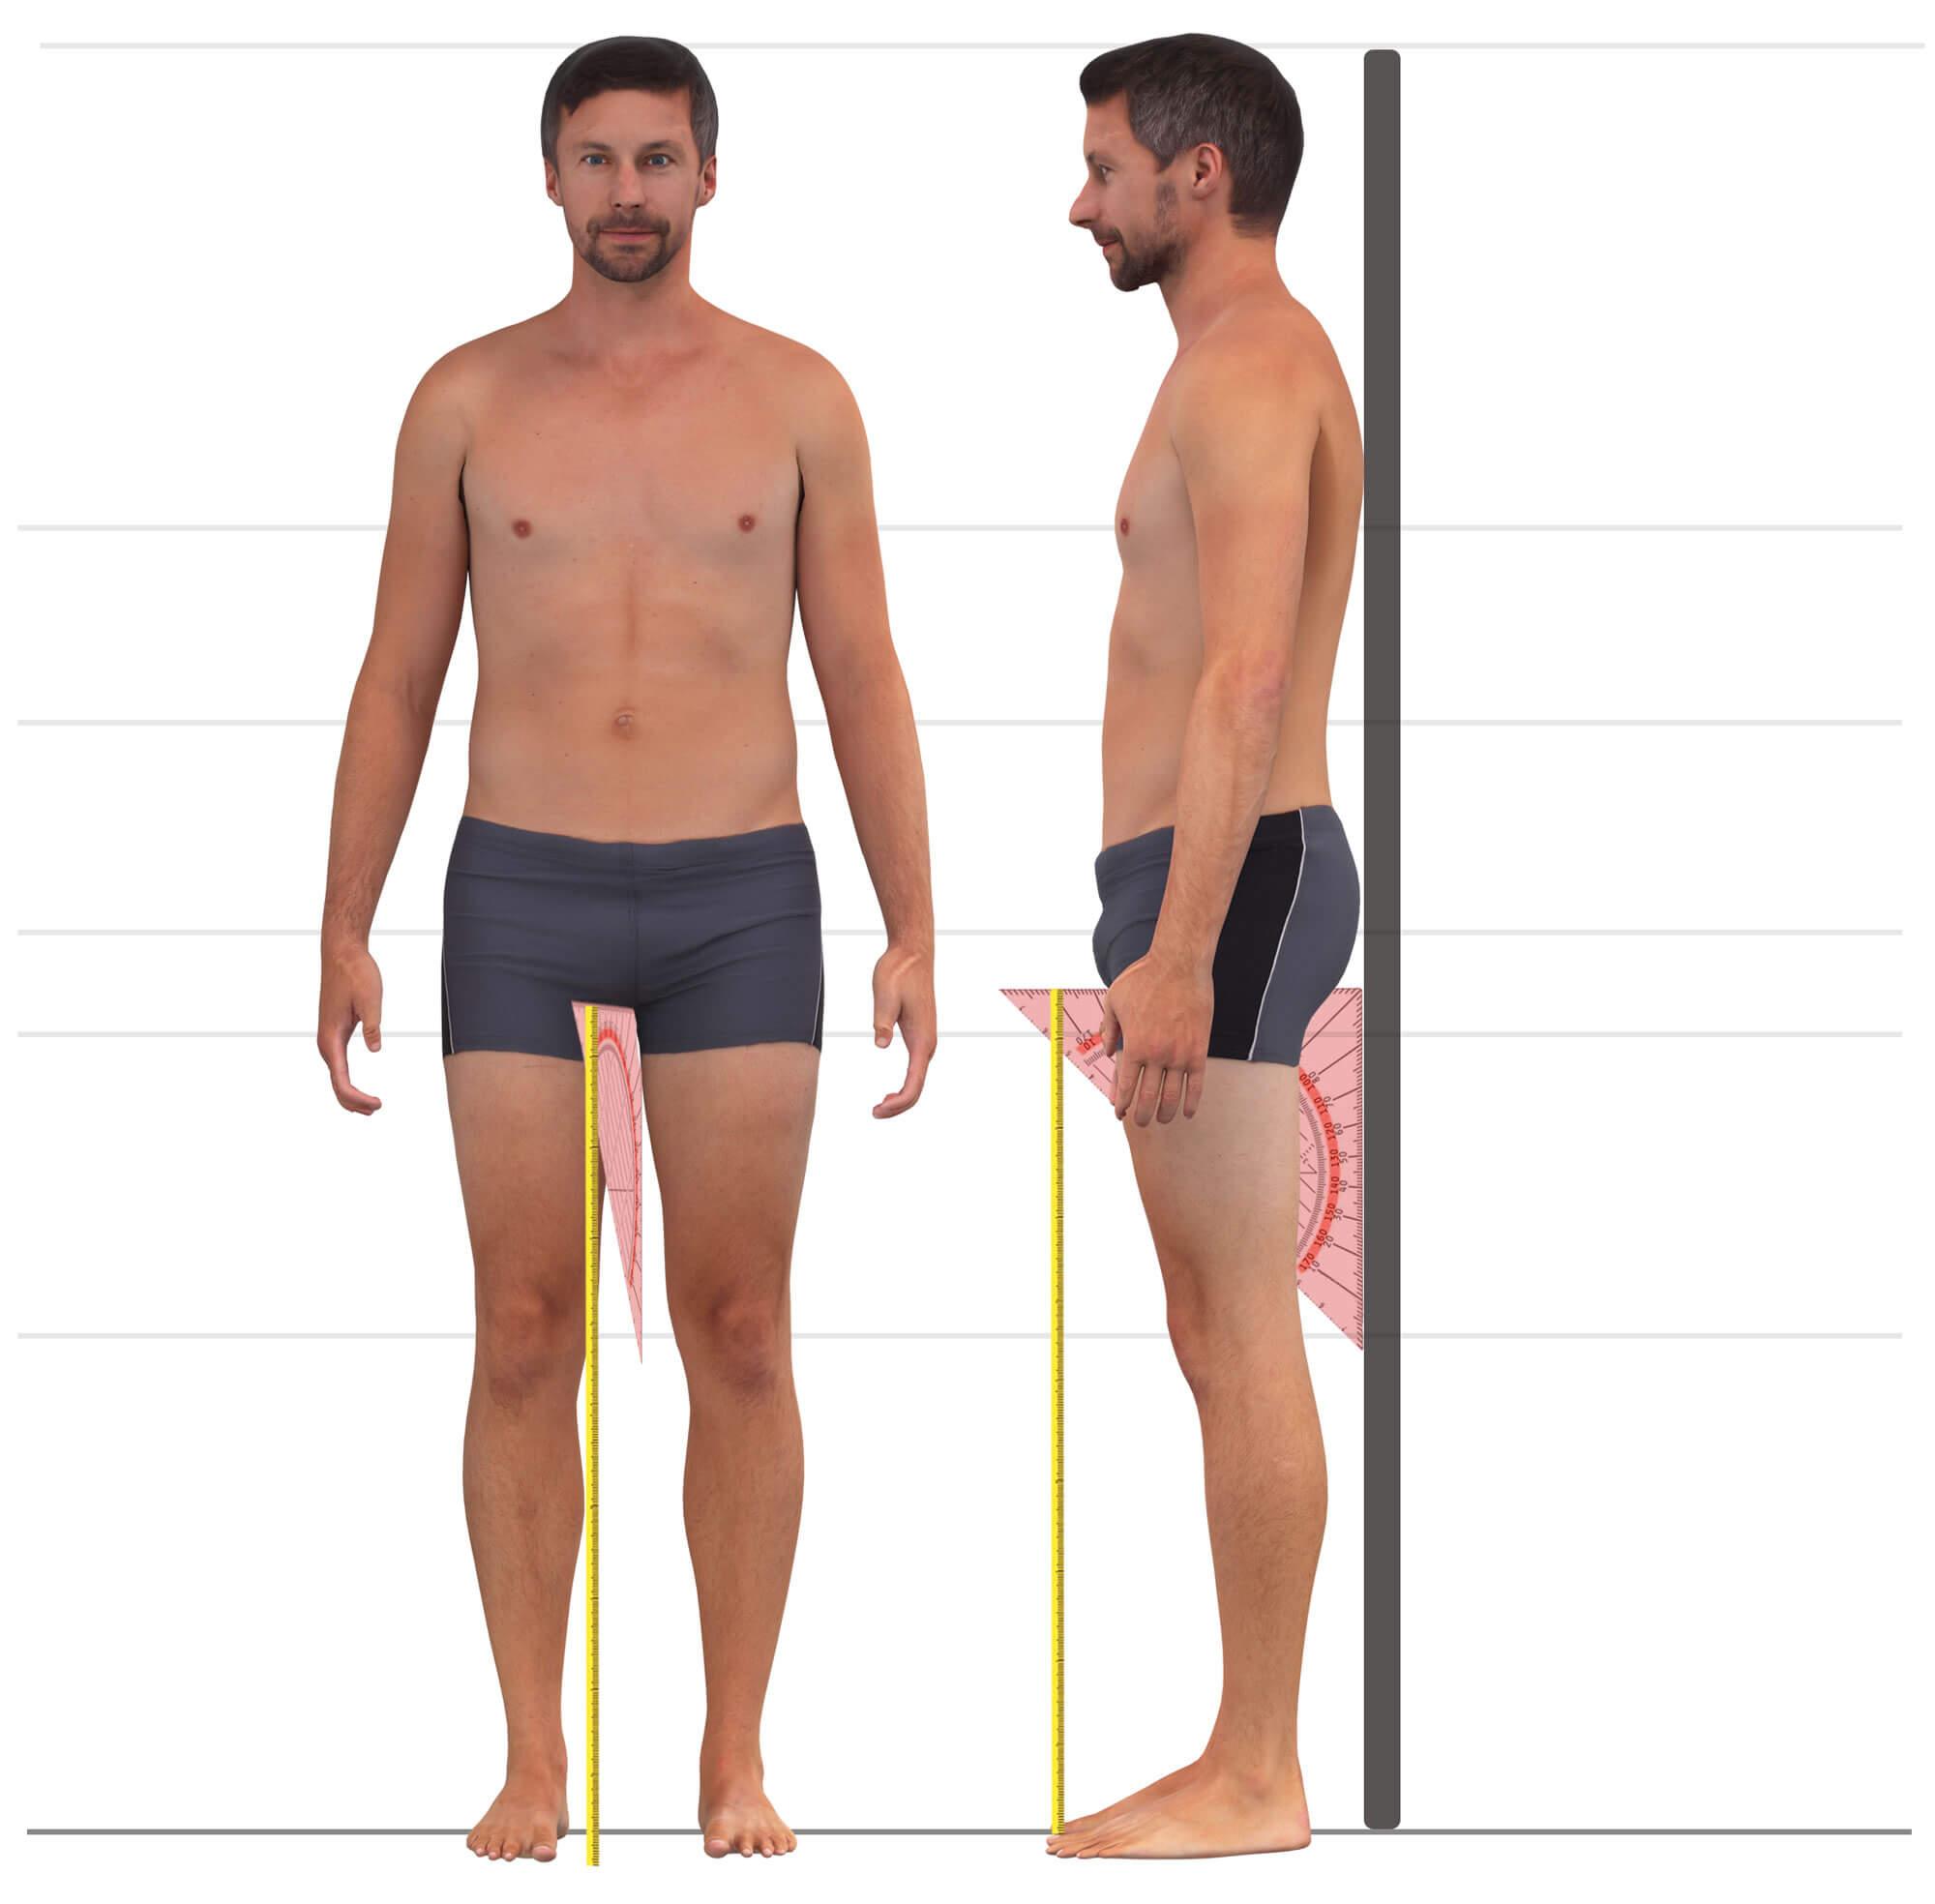 The picture shows the measurement of the inside leg length for men's pants.